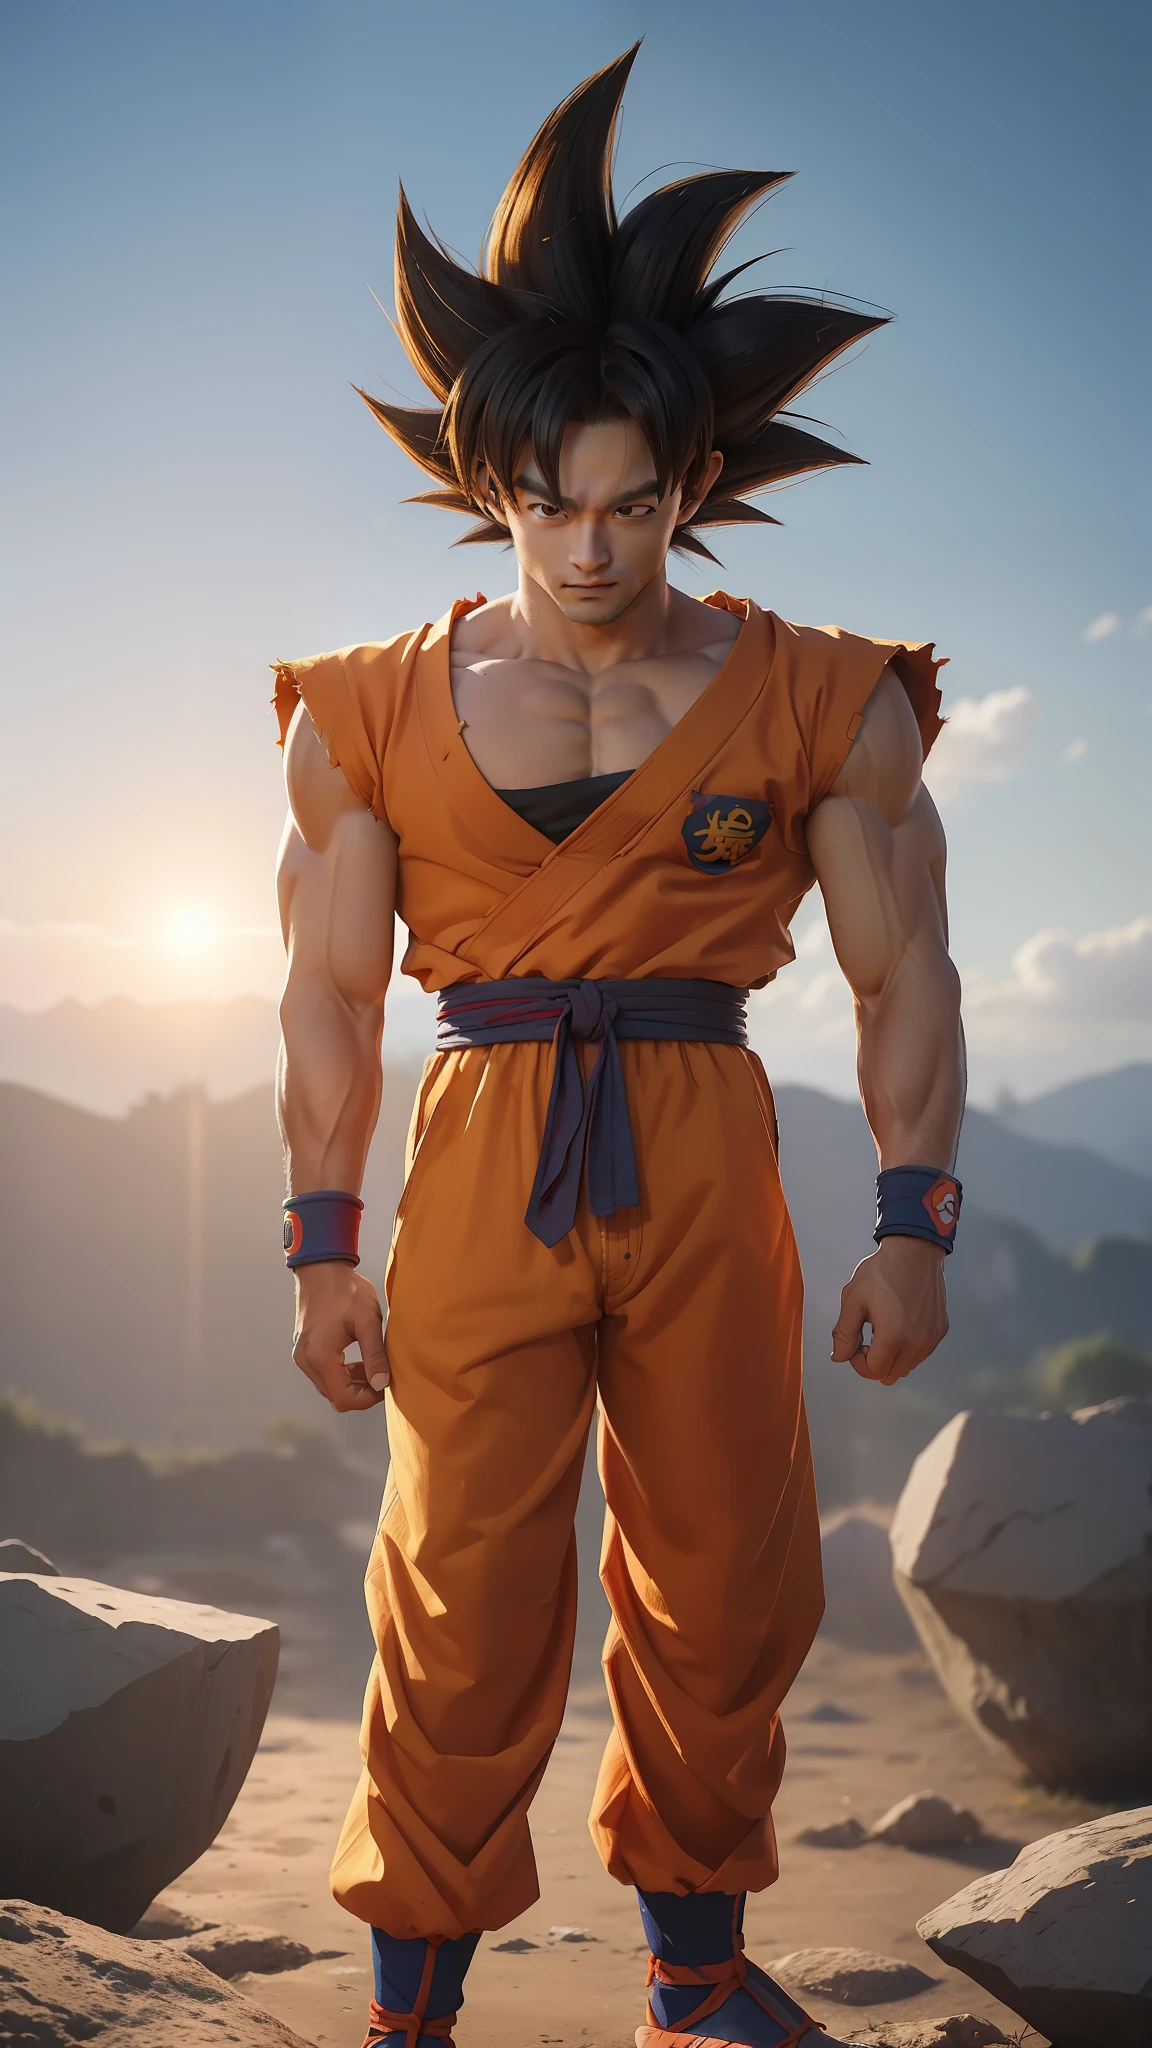 ((masutepiece:1.4, Best Quality)), ((masutepiece, Best Quality,8K)), (photographrealistic:1.4), son_Goku, sun wukong, Man's, 1boy, (Base_form), (dragonball z, Dragon Ball Super ,Goku), (spiked hair: 1.5, wristbands), muscular guy, Chest muscles, young, Cool,  (rock ground, Cracked ground, Earth), Upper body: 1.5, Professional Lighting, Hishikar-based rendering